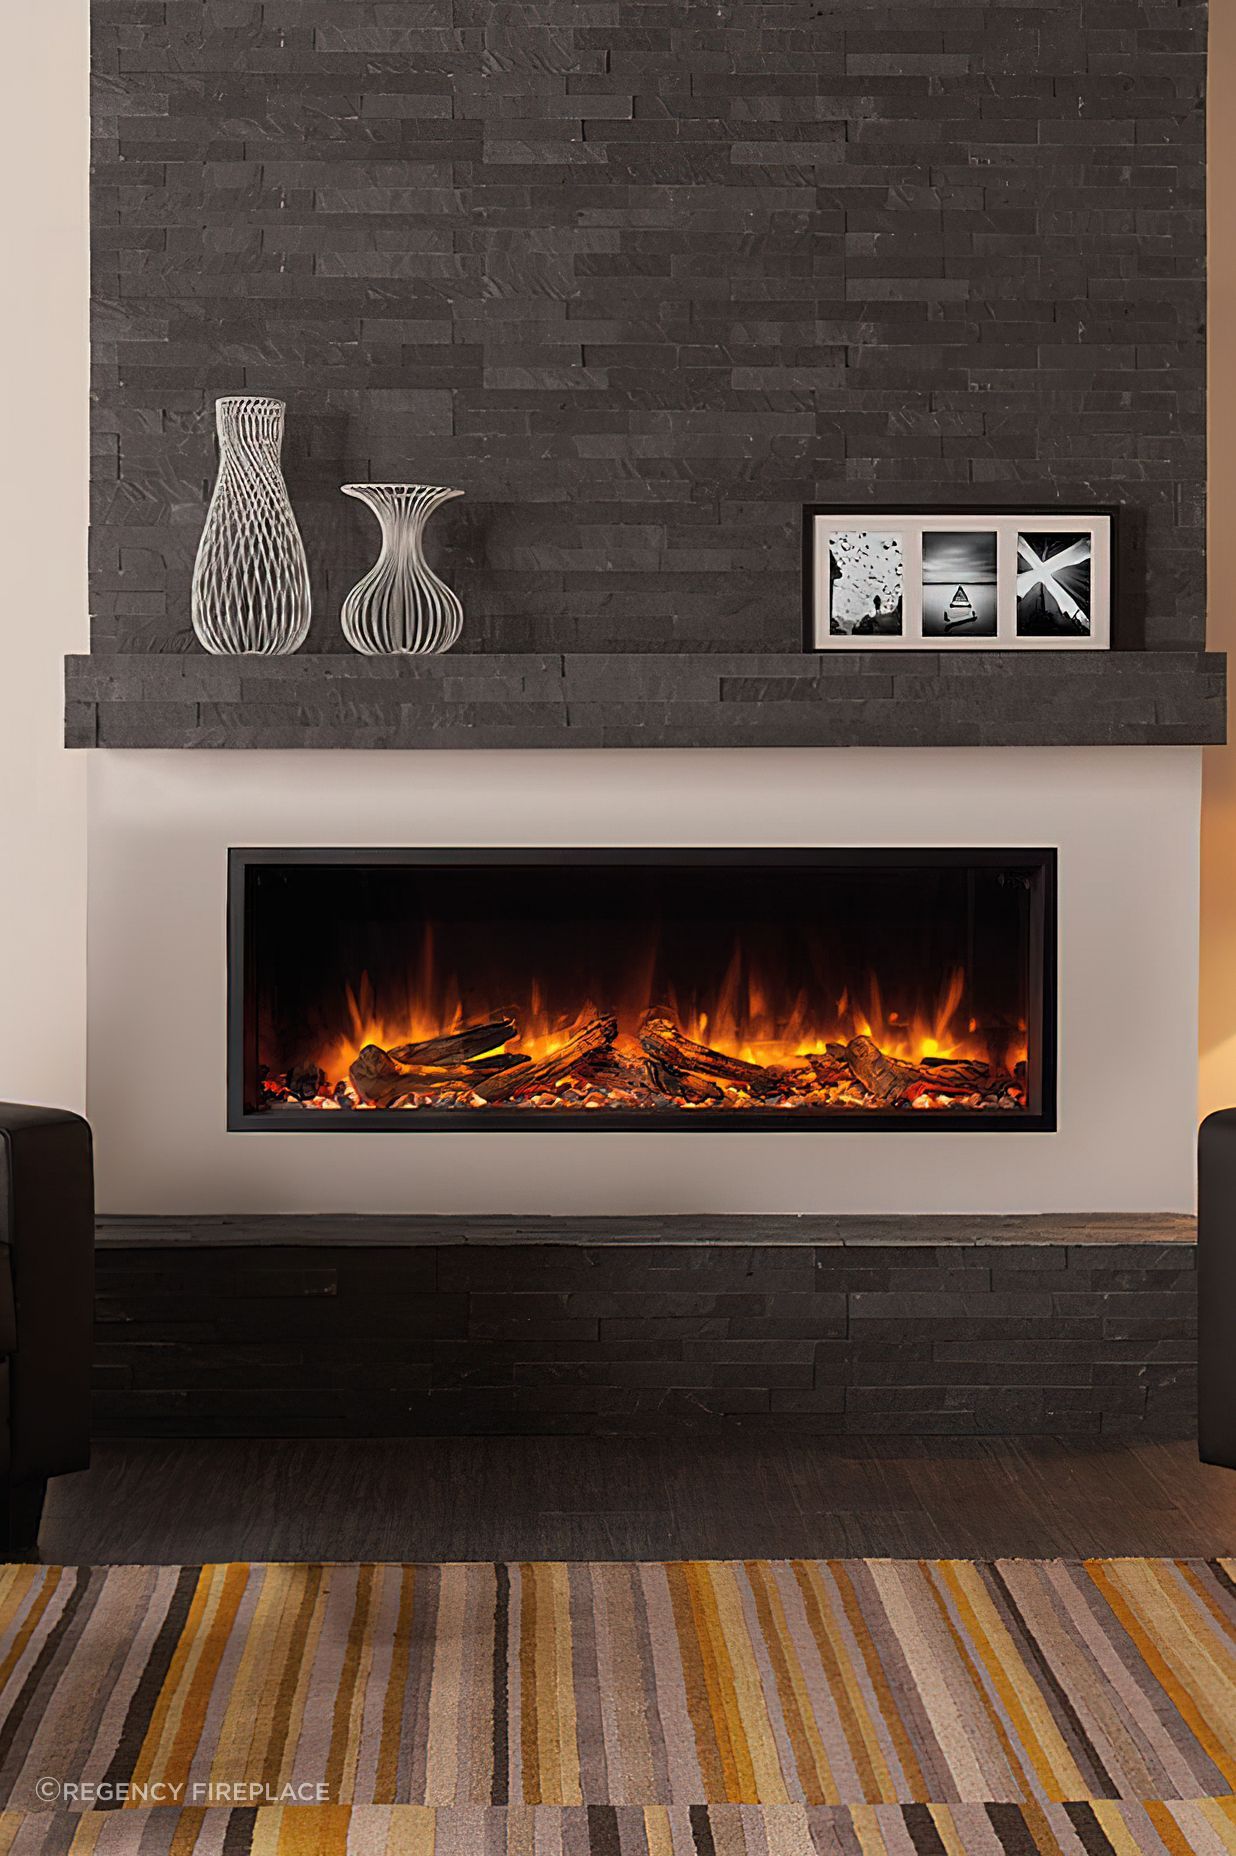 An electric fireplace can be a standout centrepiece in a cosy living space.